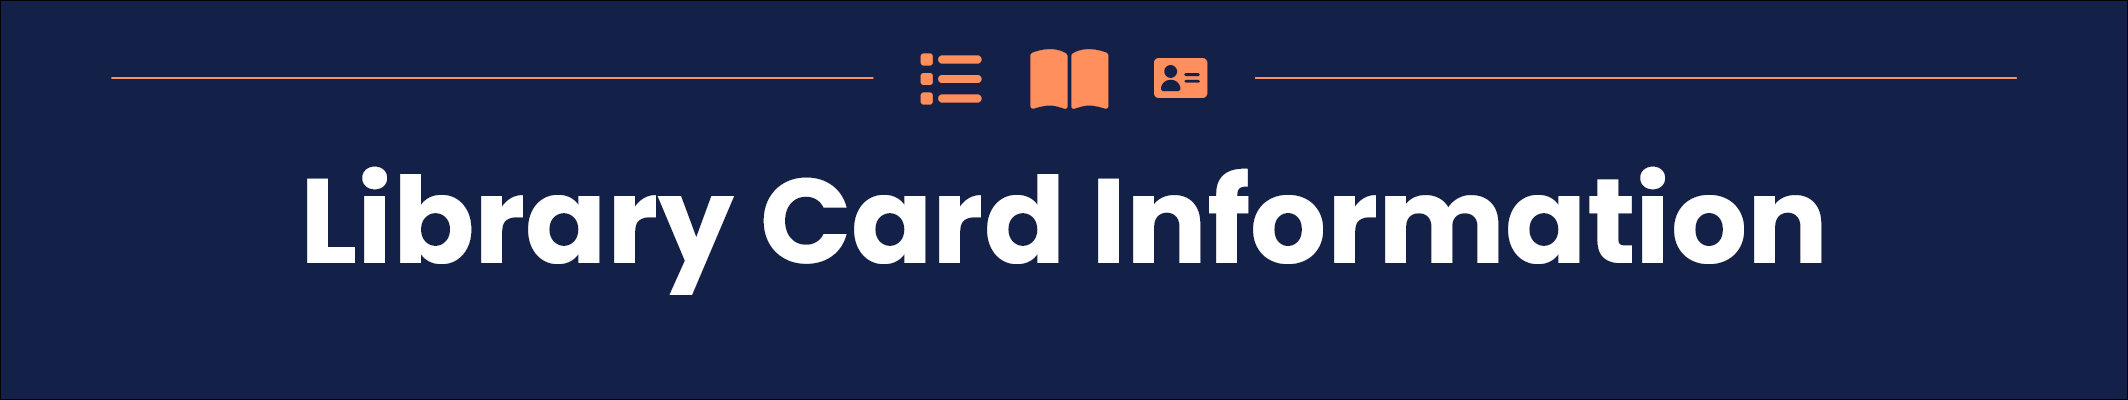 Library Card Information in white letters on a dark blue background